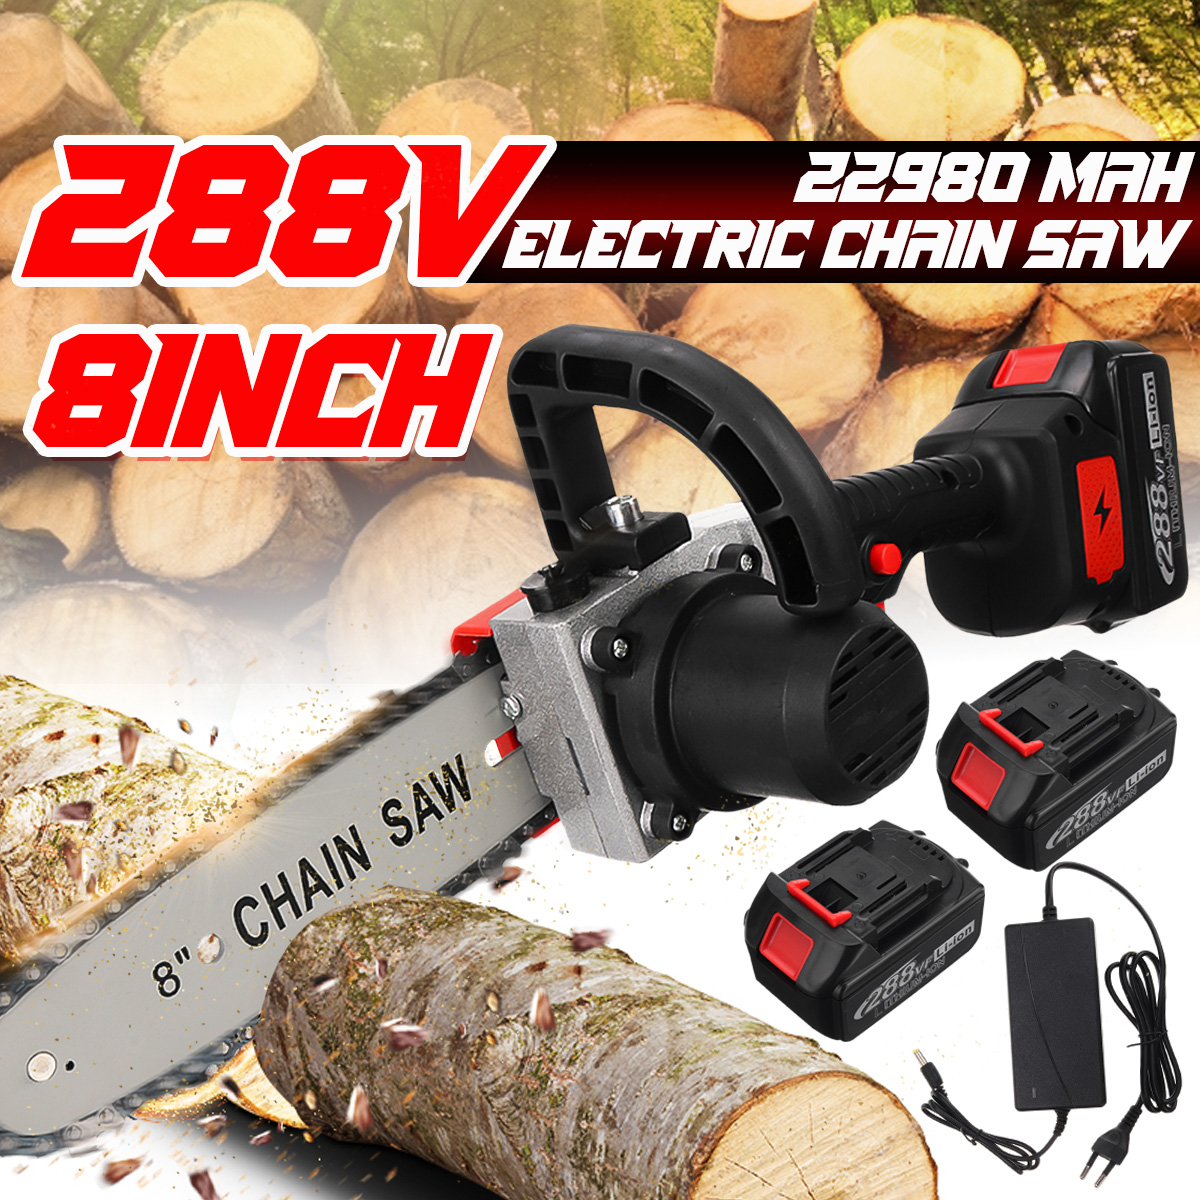 288VF-8Inch-Electric-Chain-Saw-Cordless-One-Hand-Chainsaw-Woodworking-Tool-W-12None-Battery-1845268-1